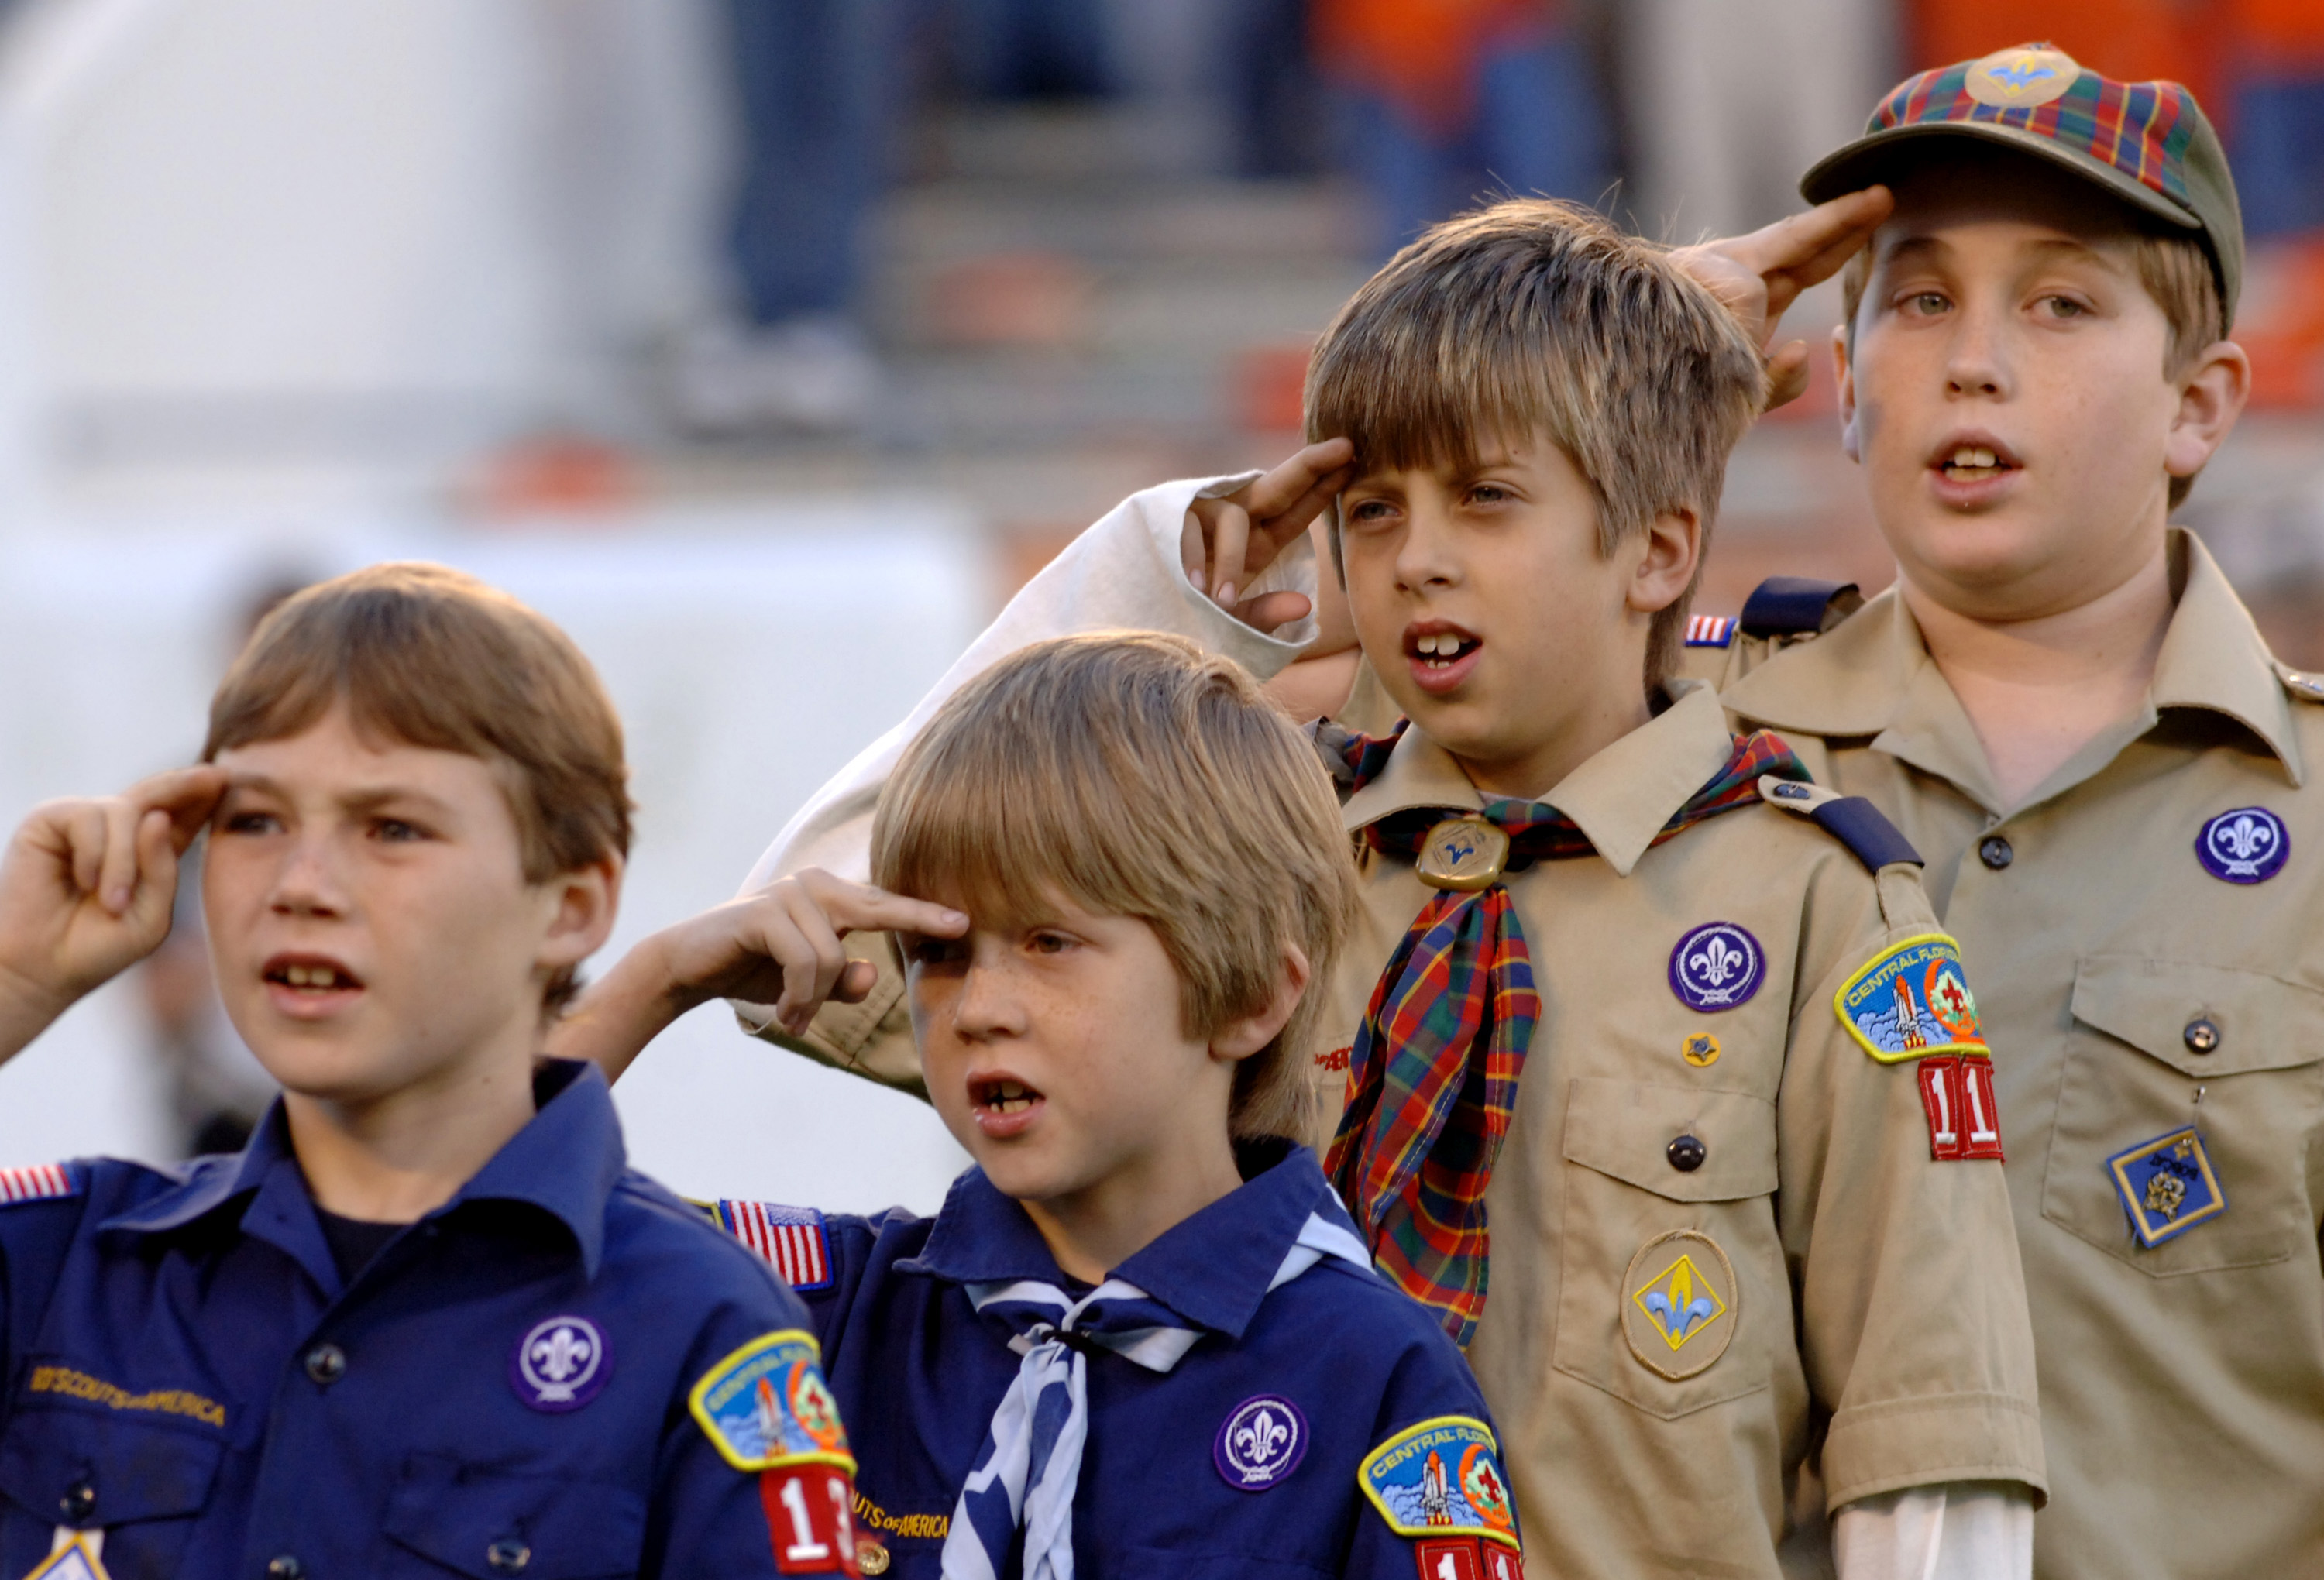 Scouts of all sizes salute during the Pledge of Allegiance before  the 2005 Champs Sports Bowl December 27 in Orlando.  Clemson defeated Colorado 19 - 10. (Photo by A. Messerschmidt/Getty Images) *** Local Caption ***